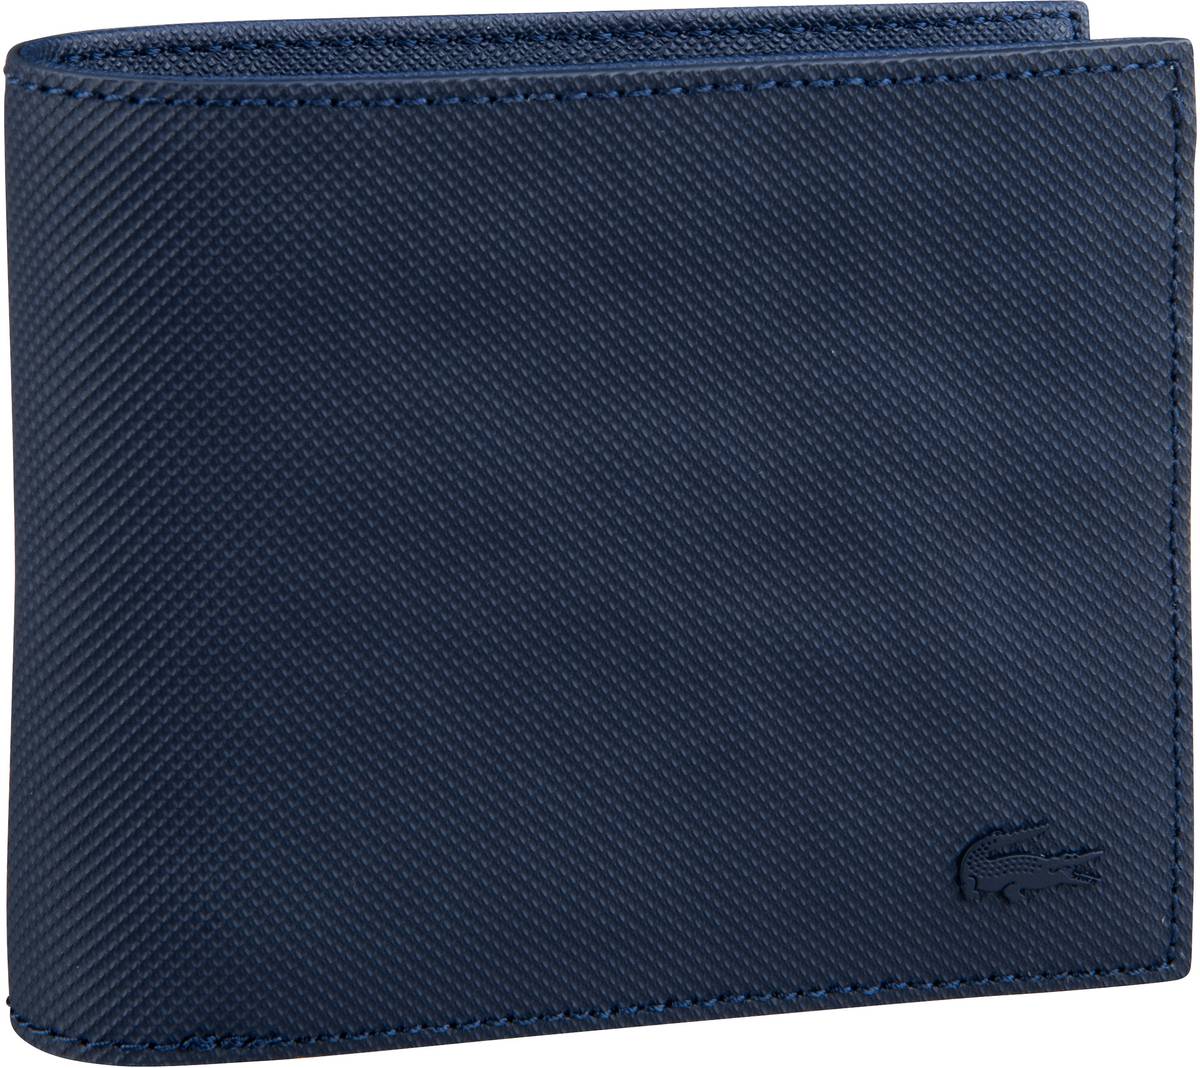 Lacoste Billfold Coin S 2309 - Peacoat